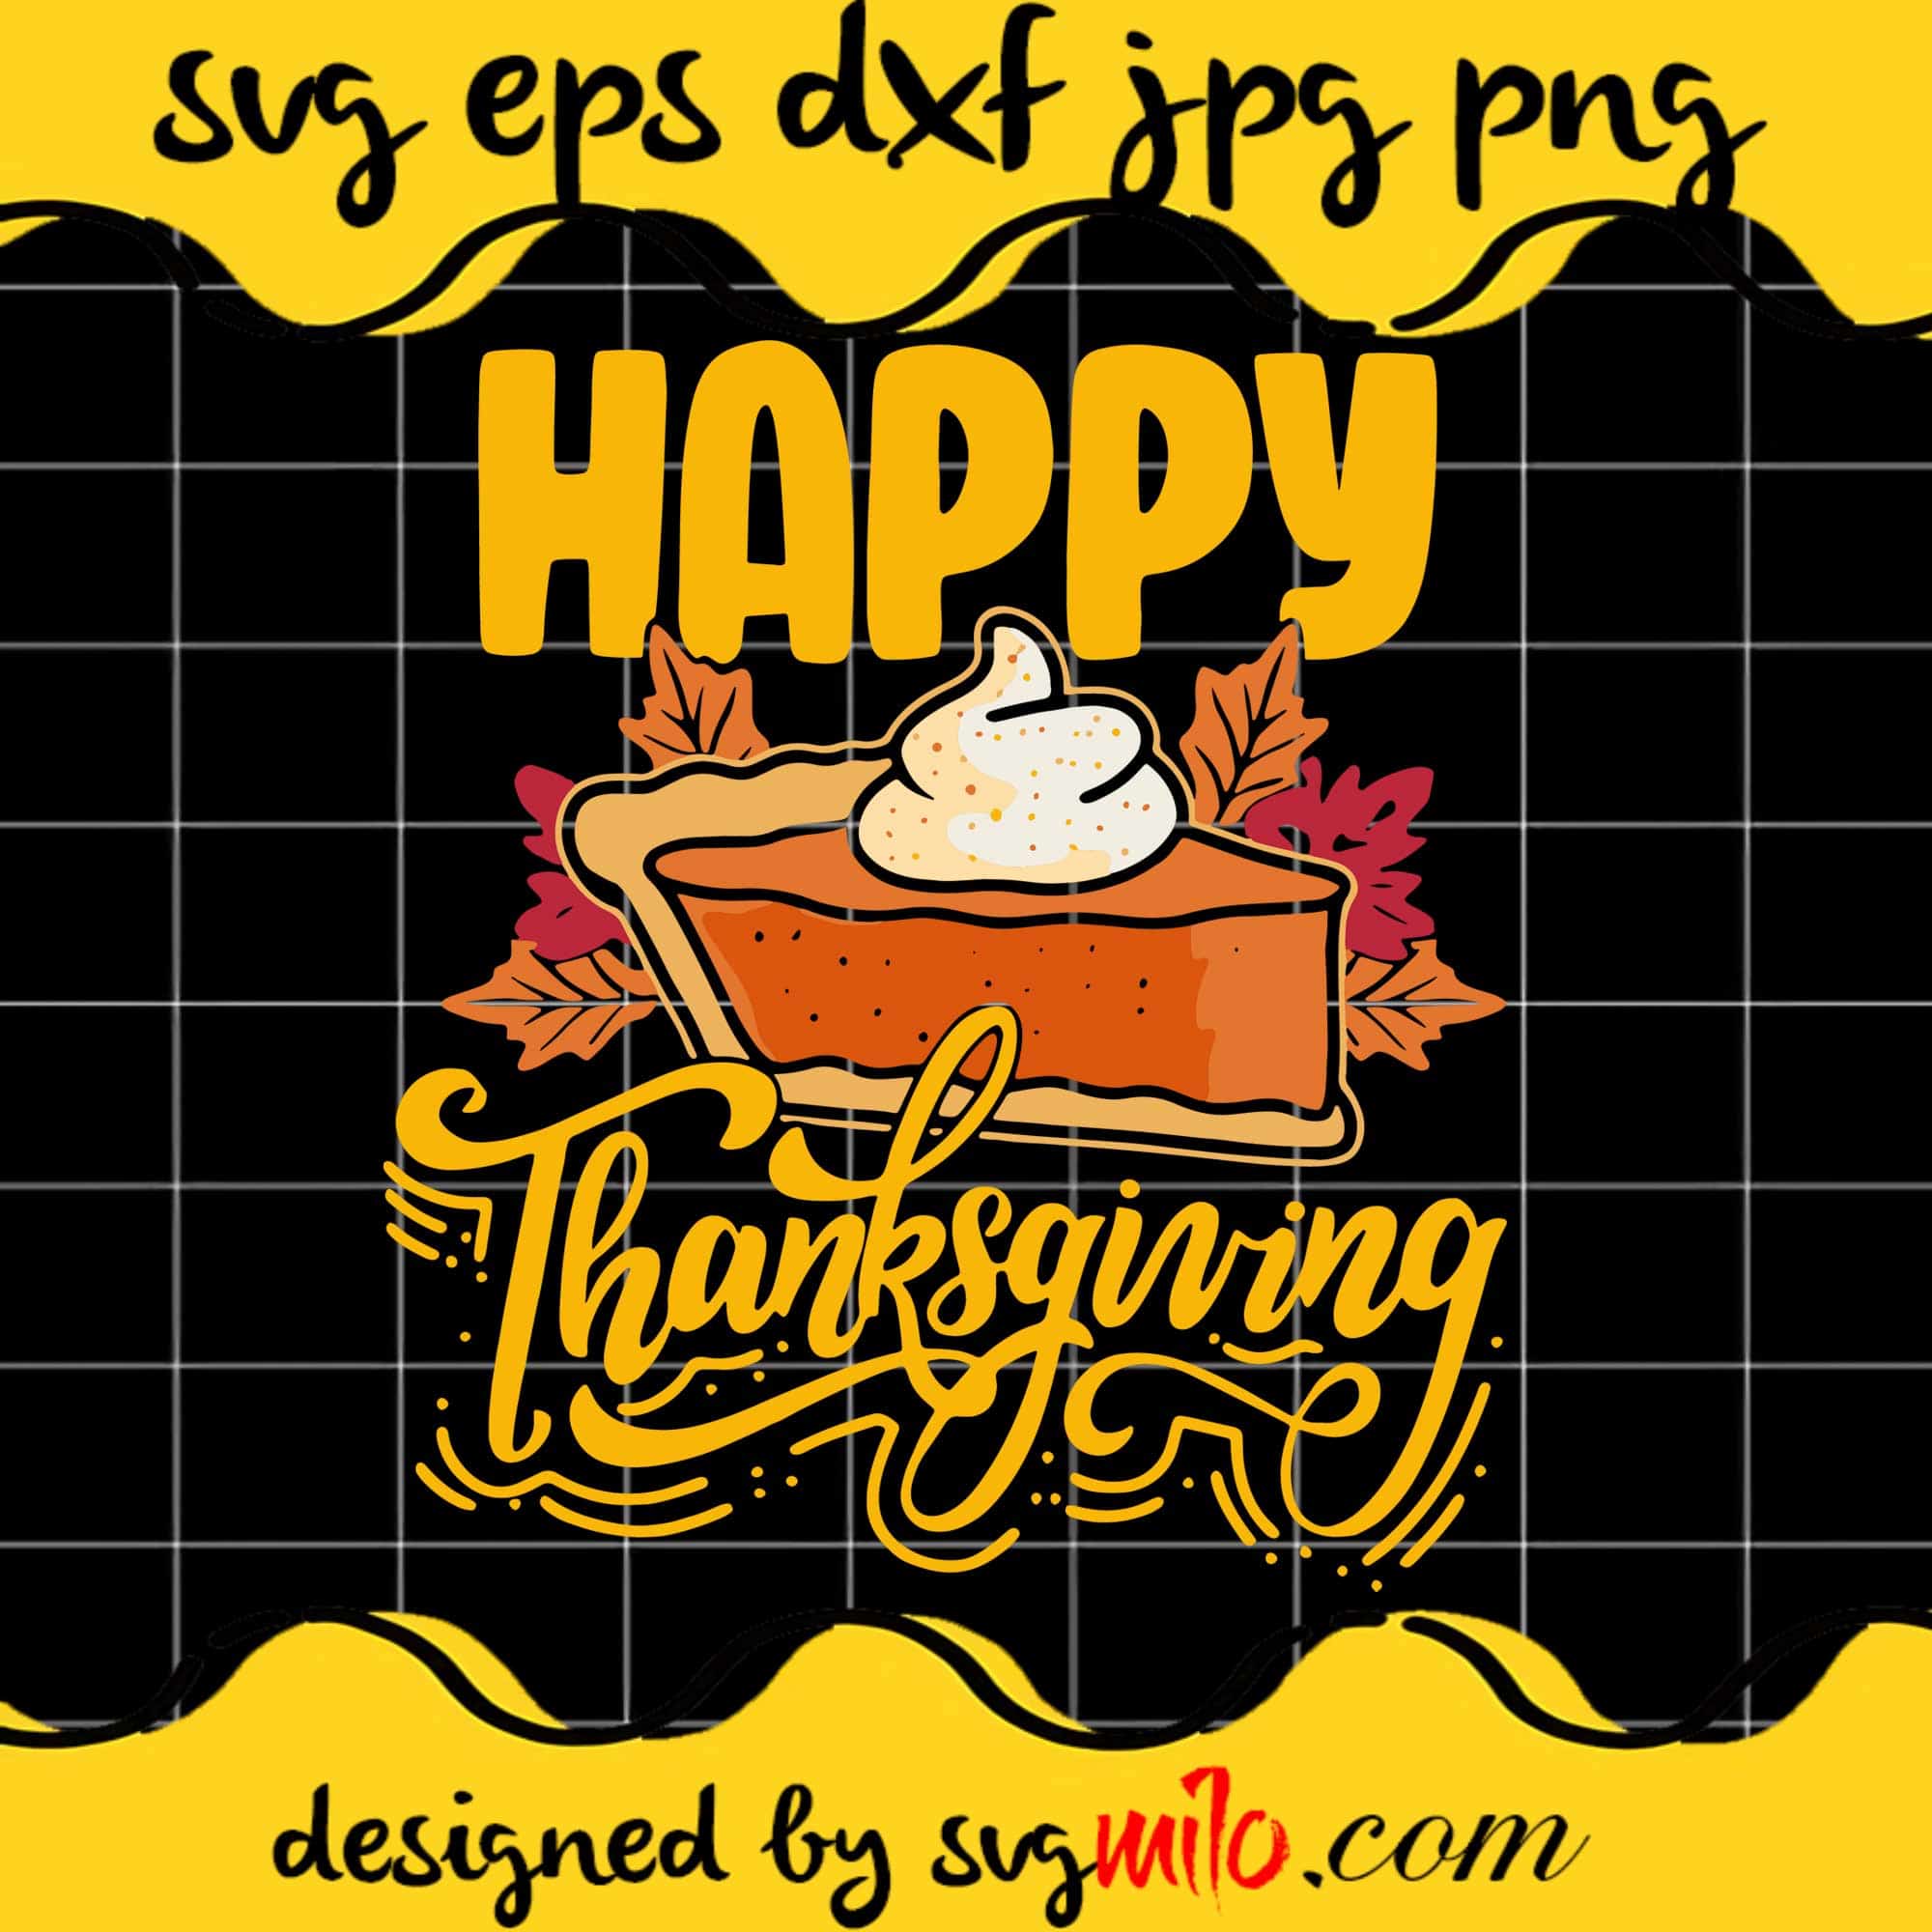 Happy Thanksgiving SVG PNG DXF EPS Cut Files For Cricut Silhouette,Premium quality SVG - SVGMILO